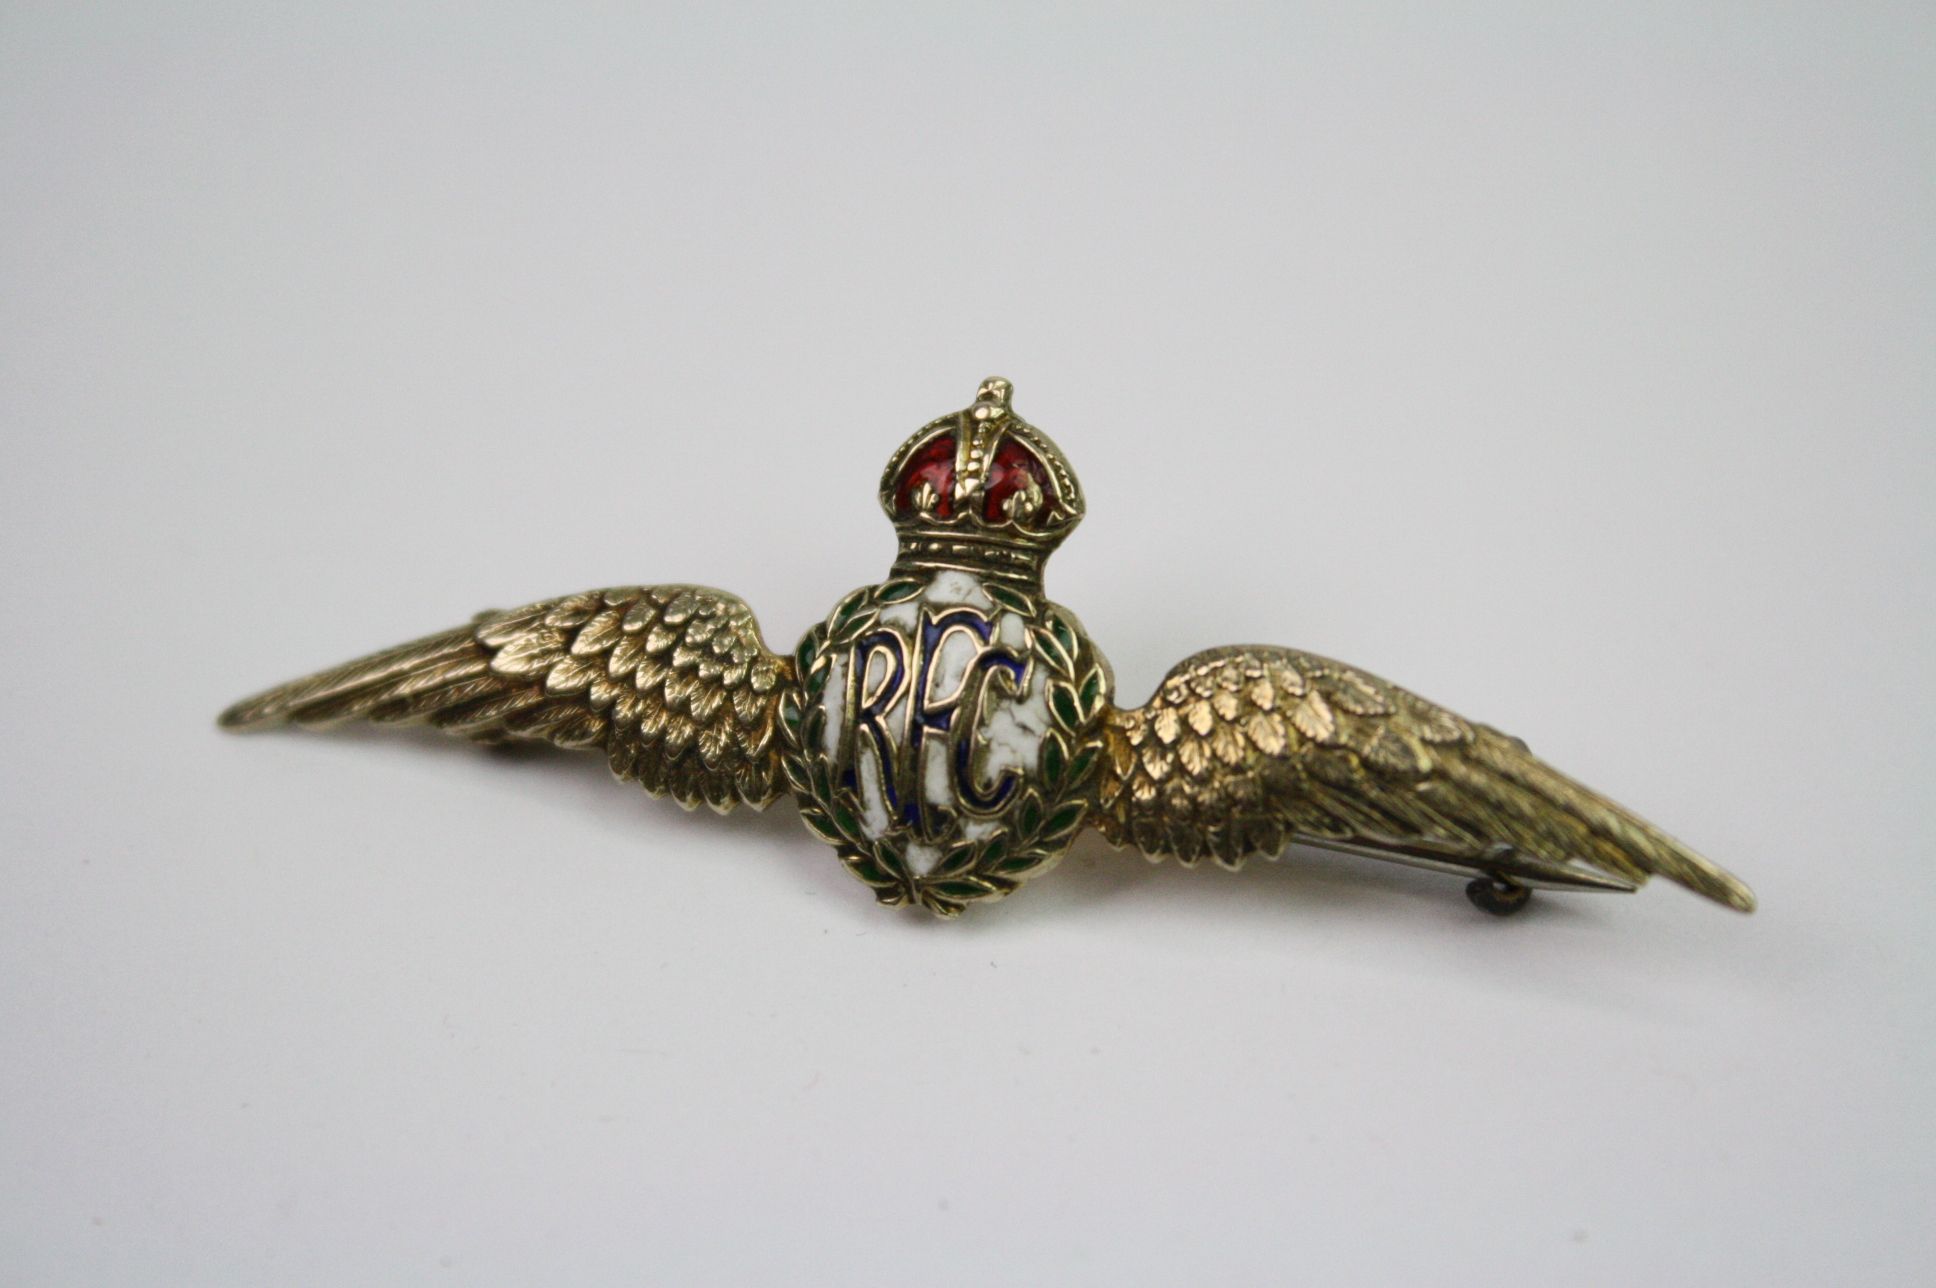 A 9ct Gold And Enamel Royal Flying Corps / RFC Wings Sweetheart Brooch, Marked 9ct For 9ct Gold To